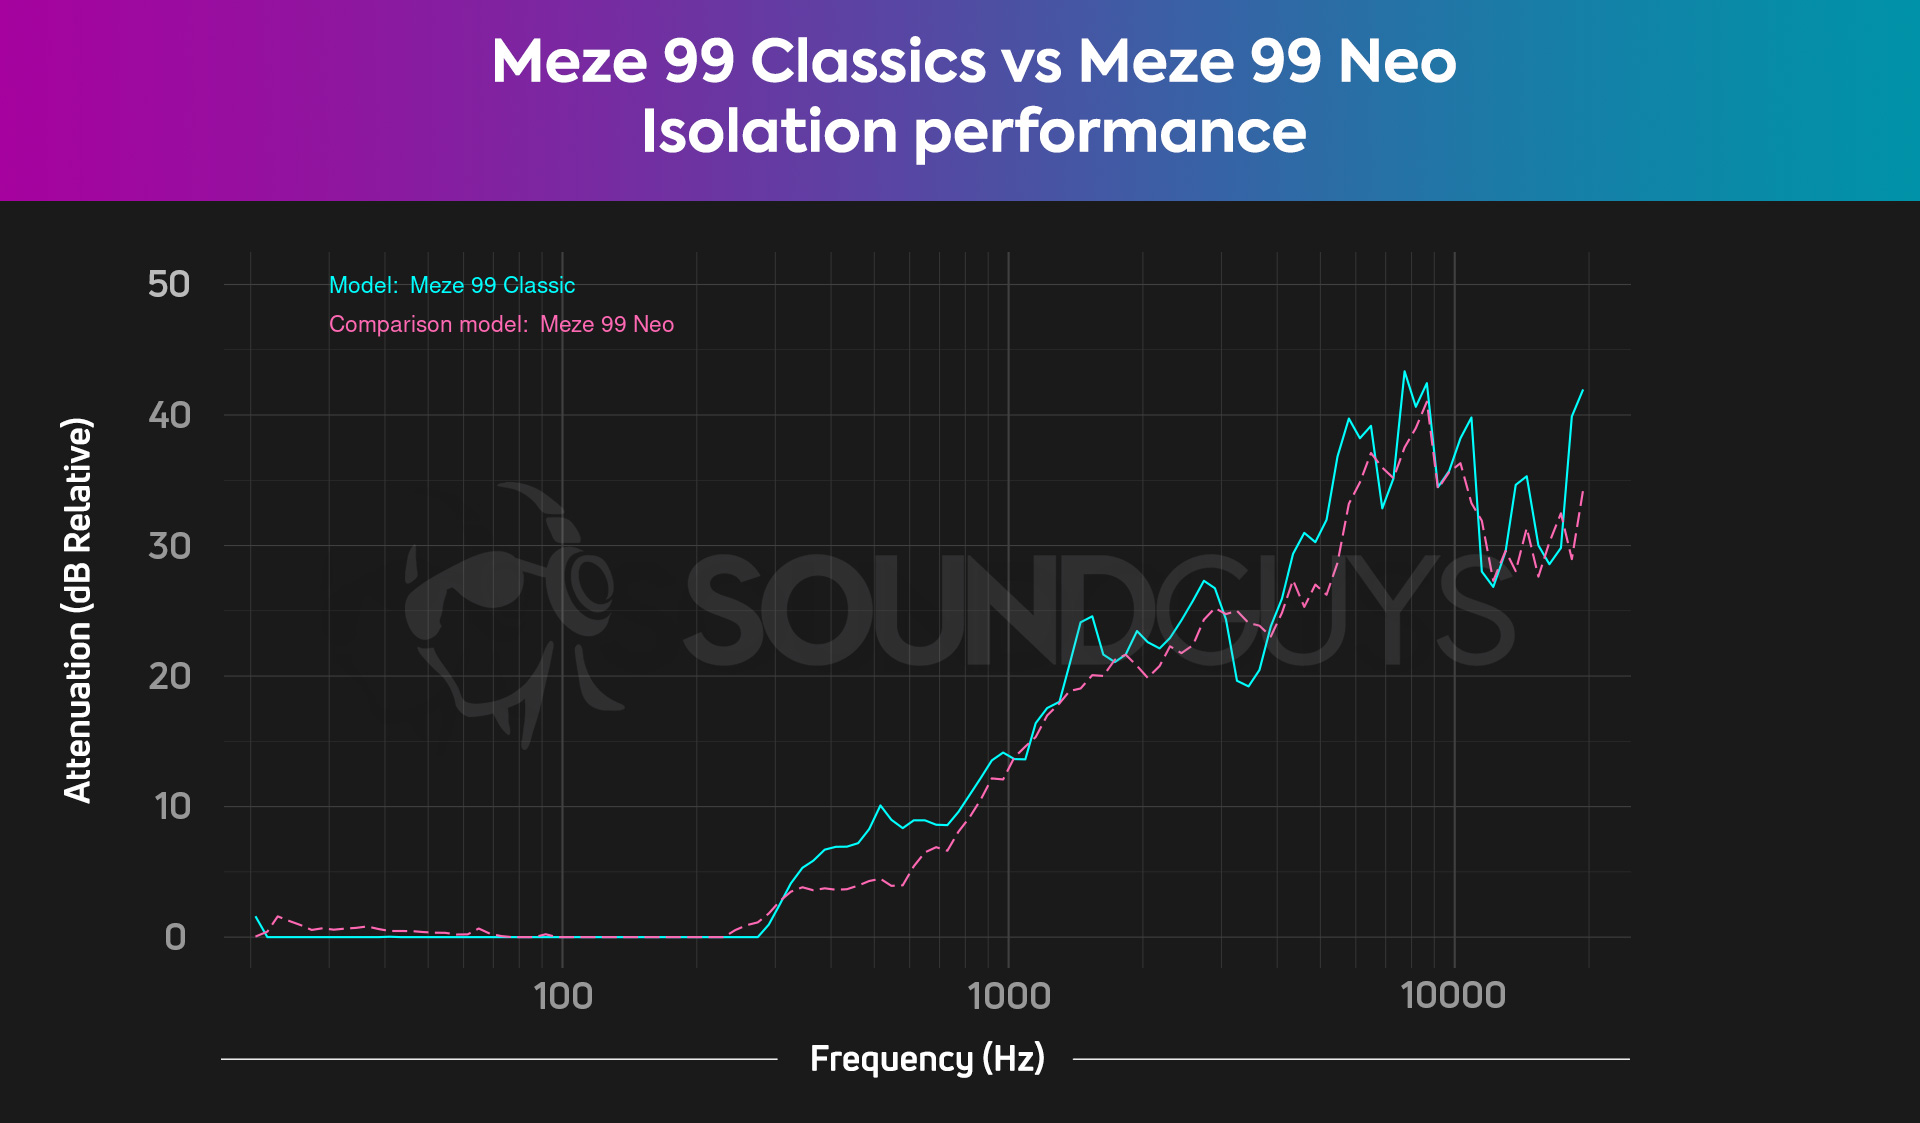 A chart compares the isolation performance of the Meze 99 Classics and 99 Neo and shows they have virtually identical performances.